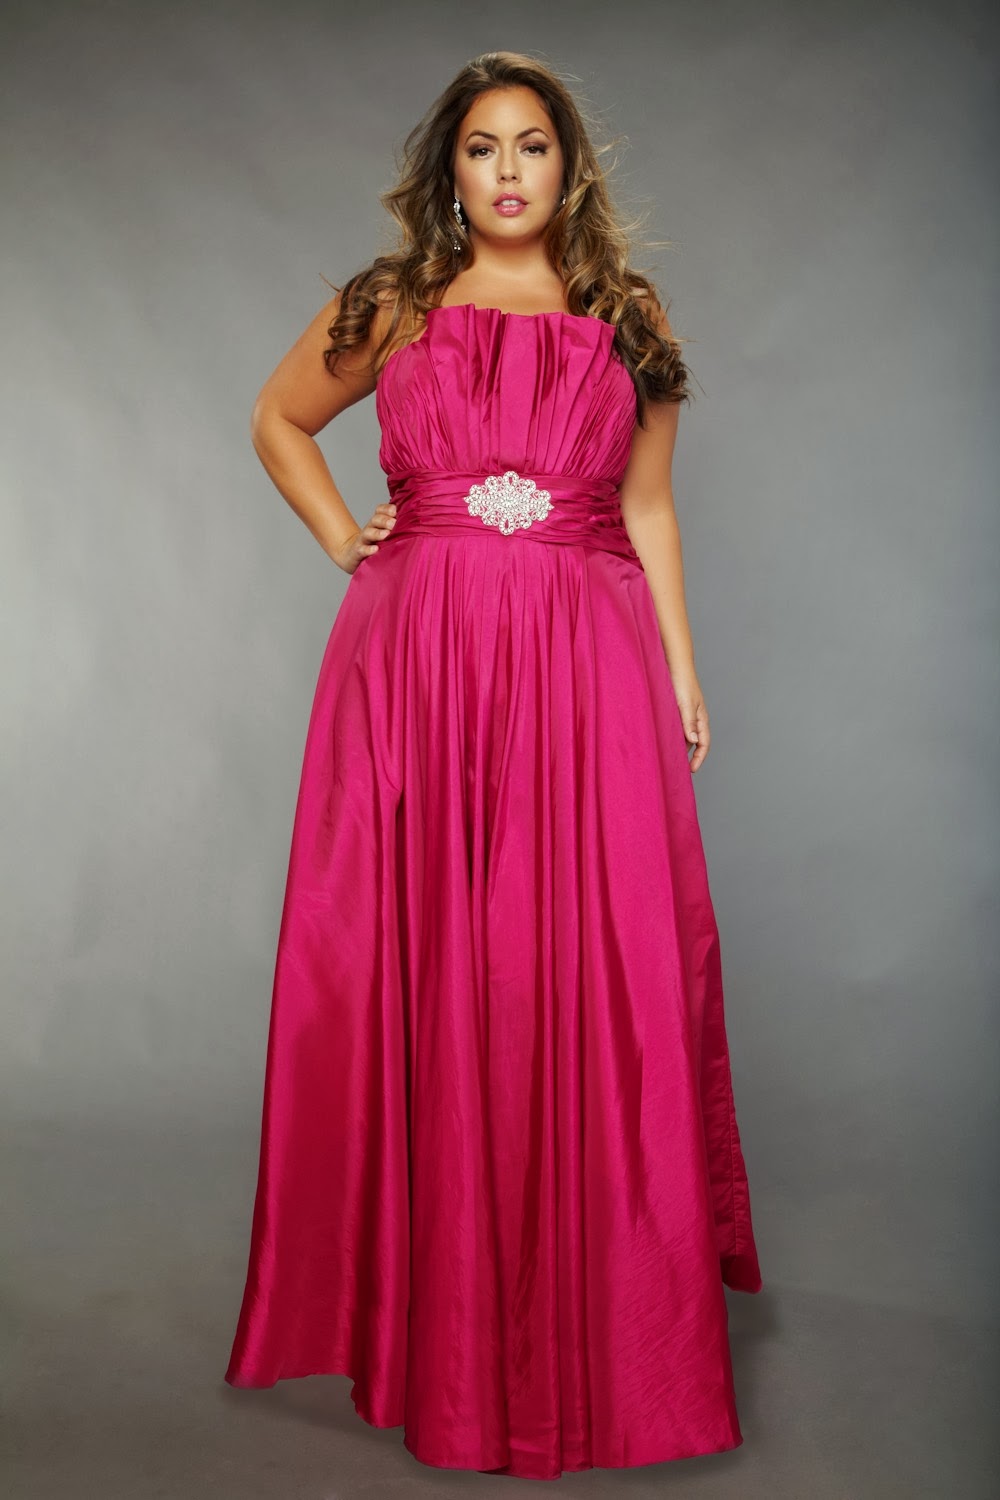 Hot Trend Strapless Plus Size Prom Dresses Prom Dresses Gowns Fashion